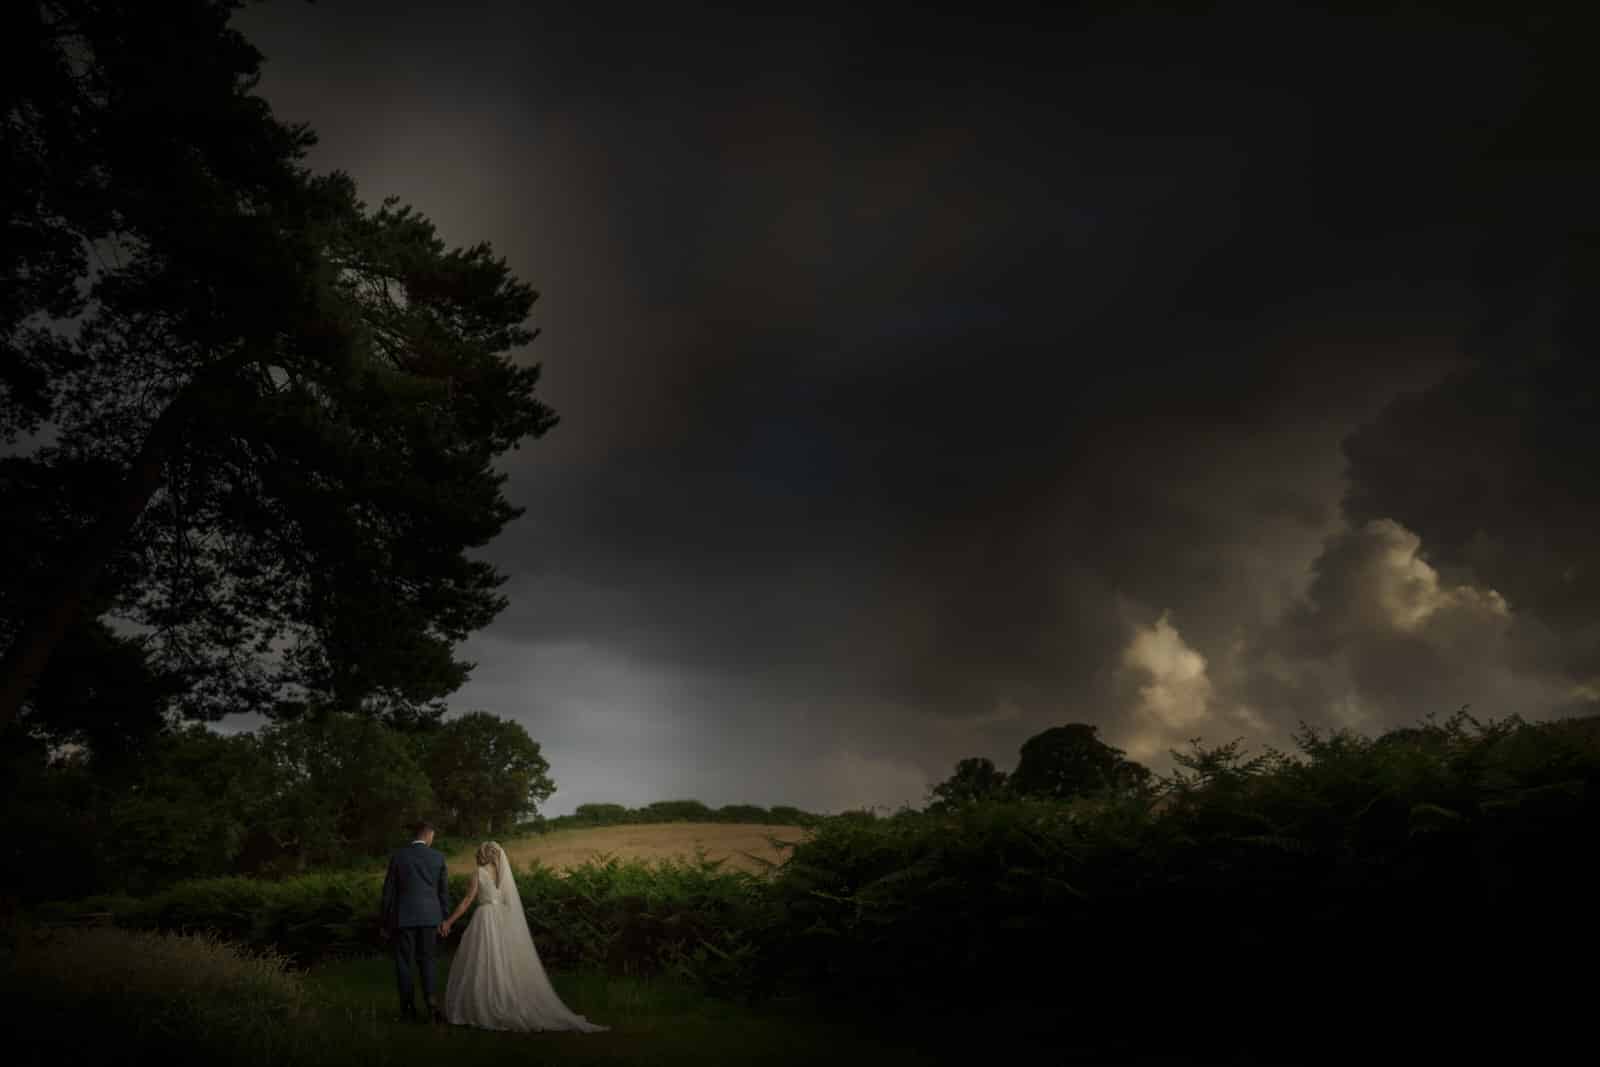 a bride and groom standing in a field under a stormy sky.